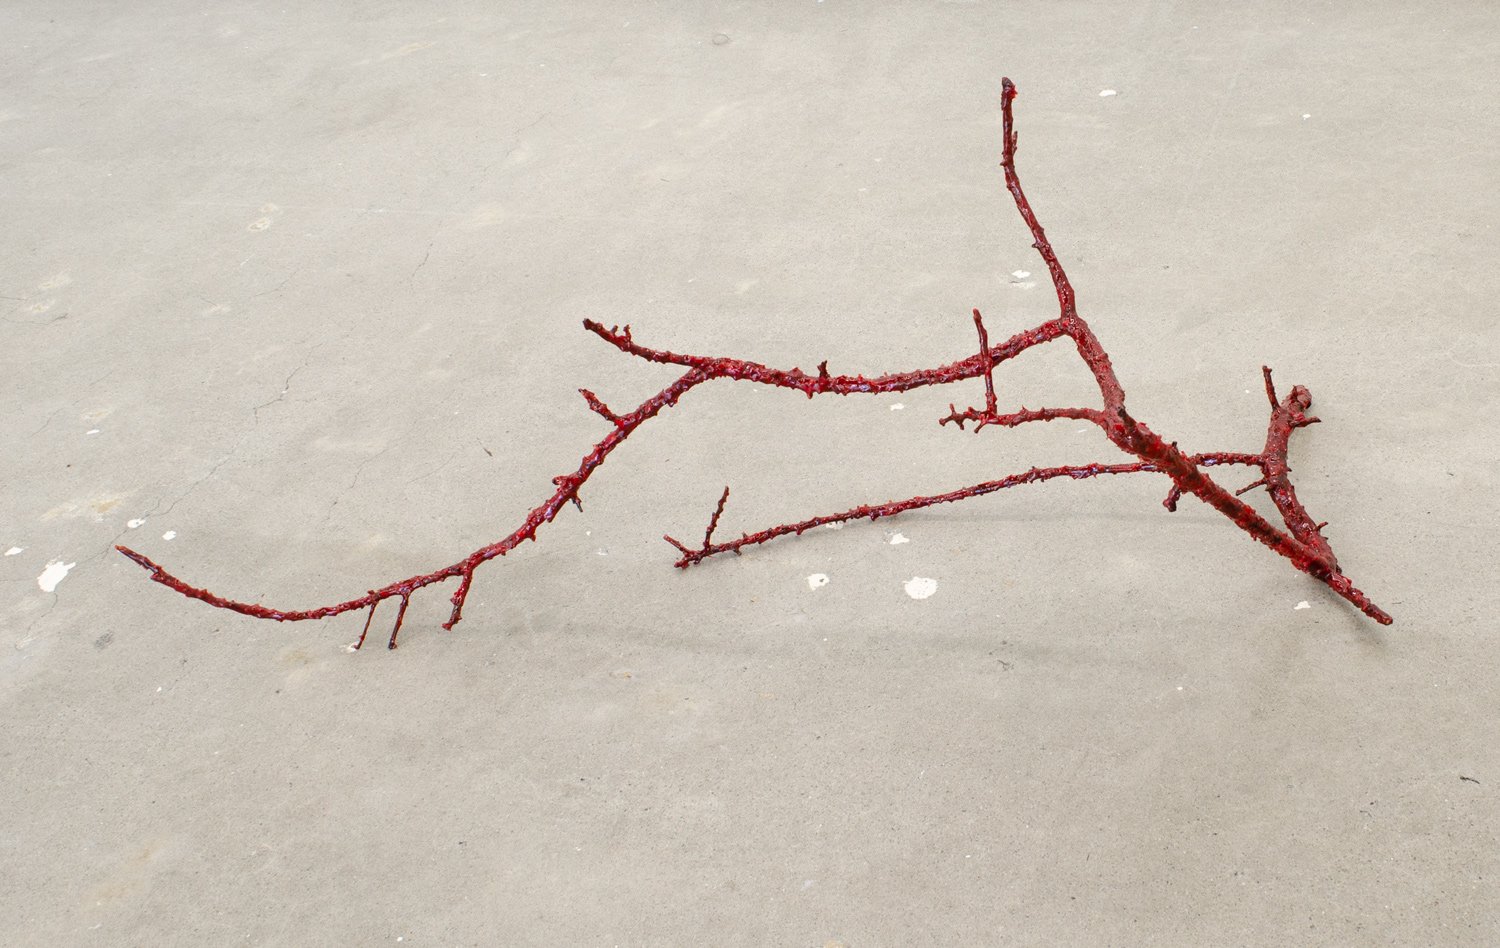  Swelter, 2021, Found branch, resin and cellophane, 1330 x 500 x 550 